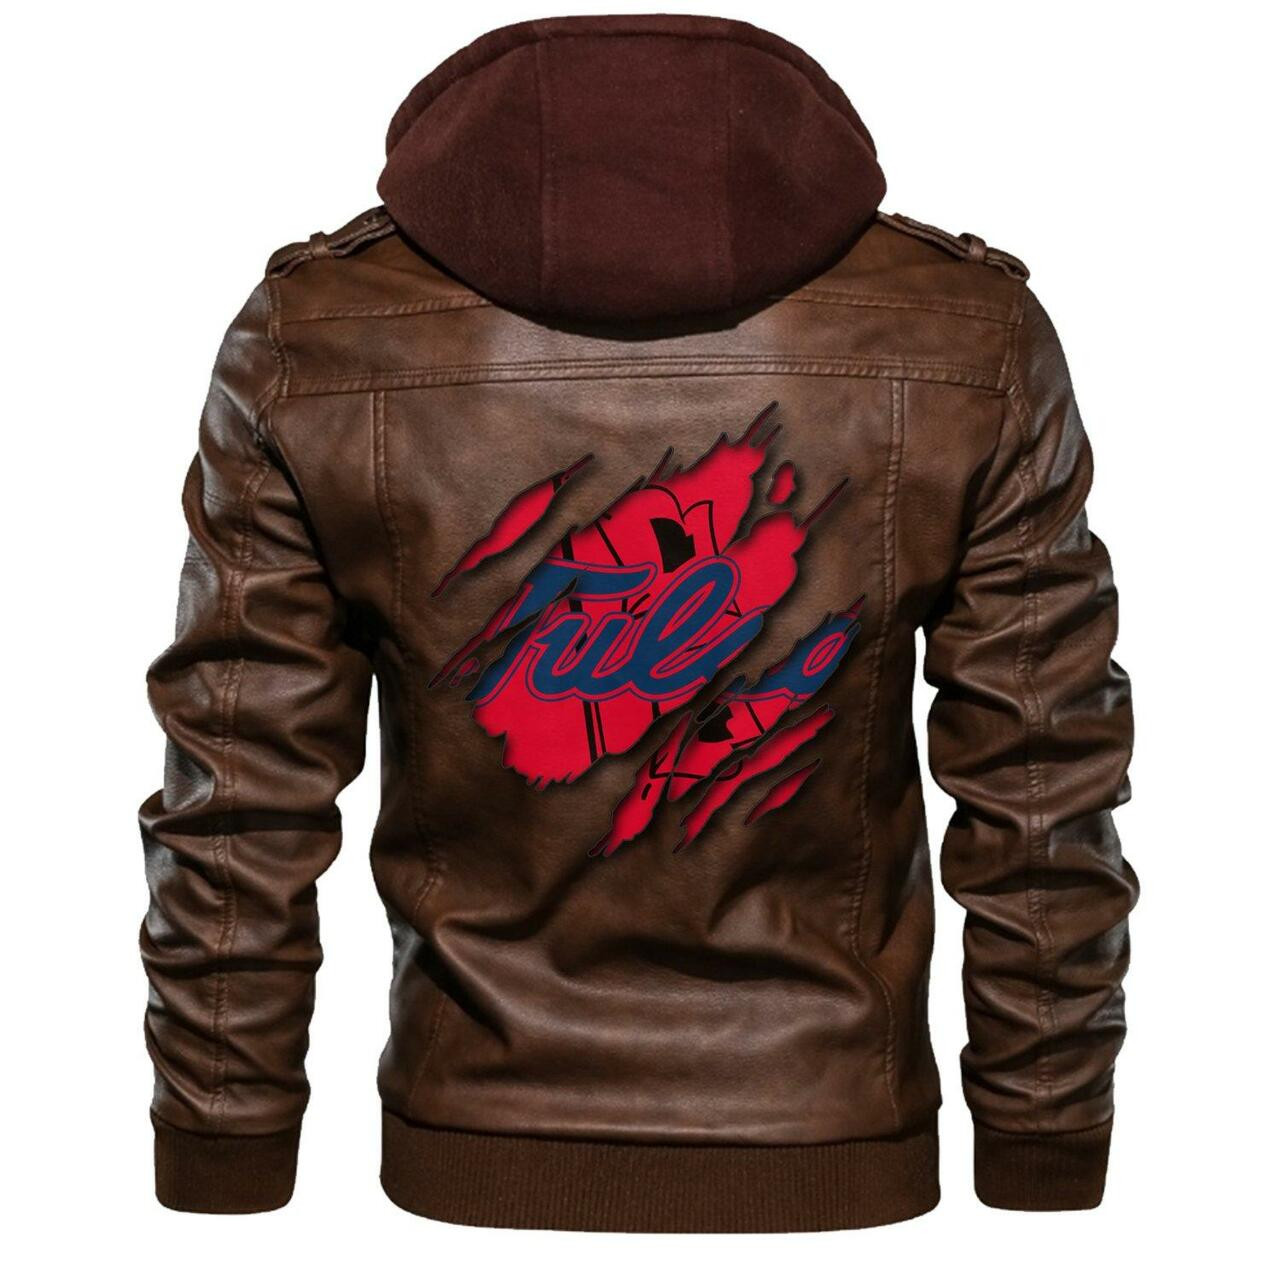 Top leather jacket can keep you warm on cooler days 202